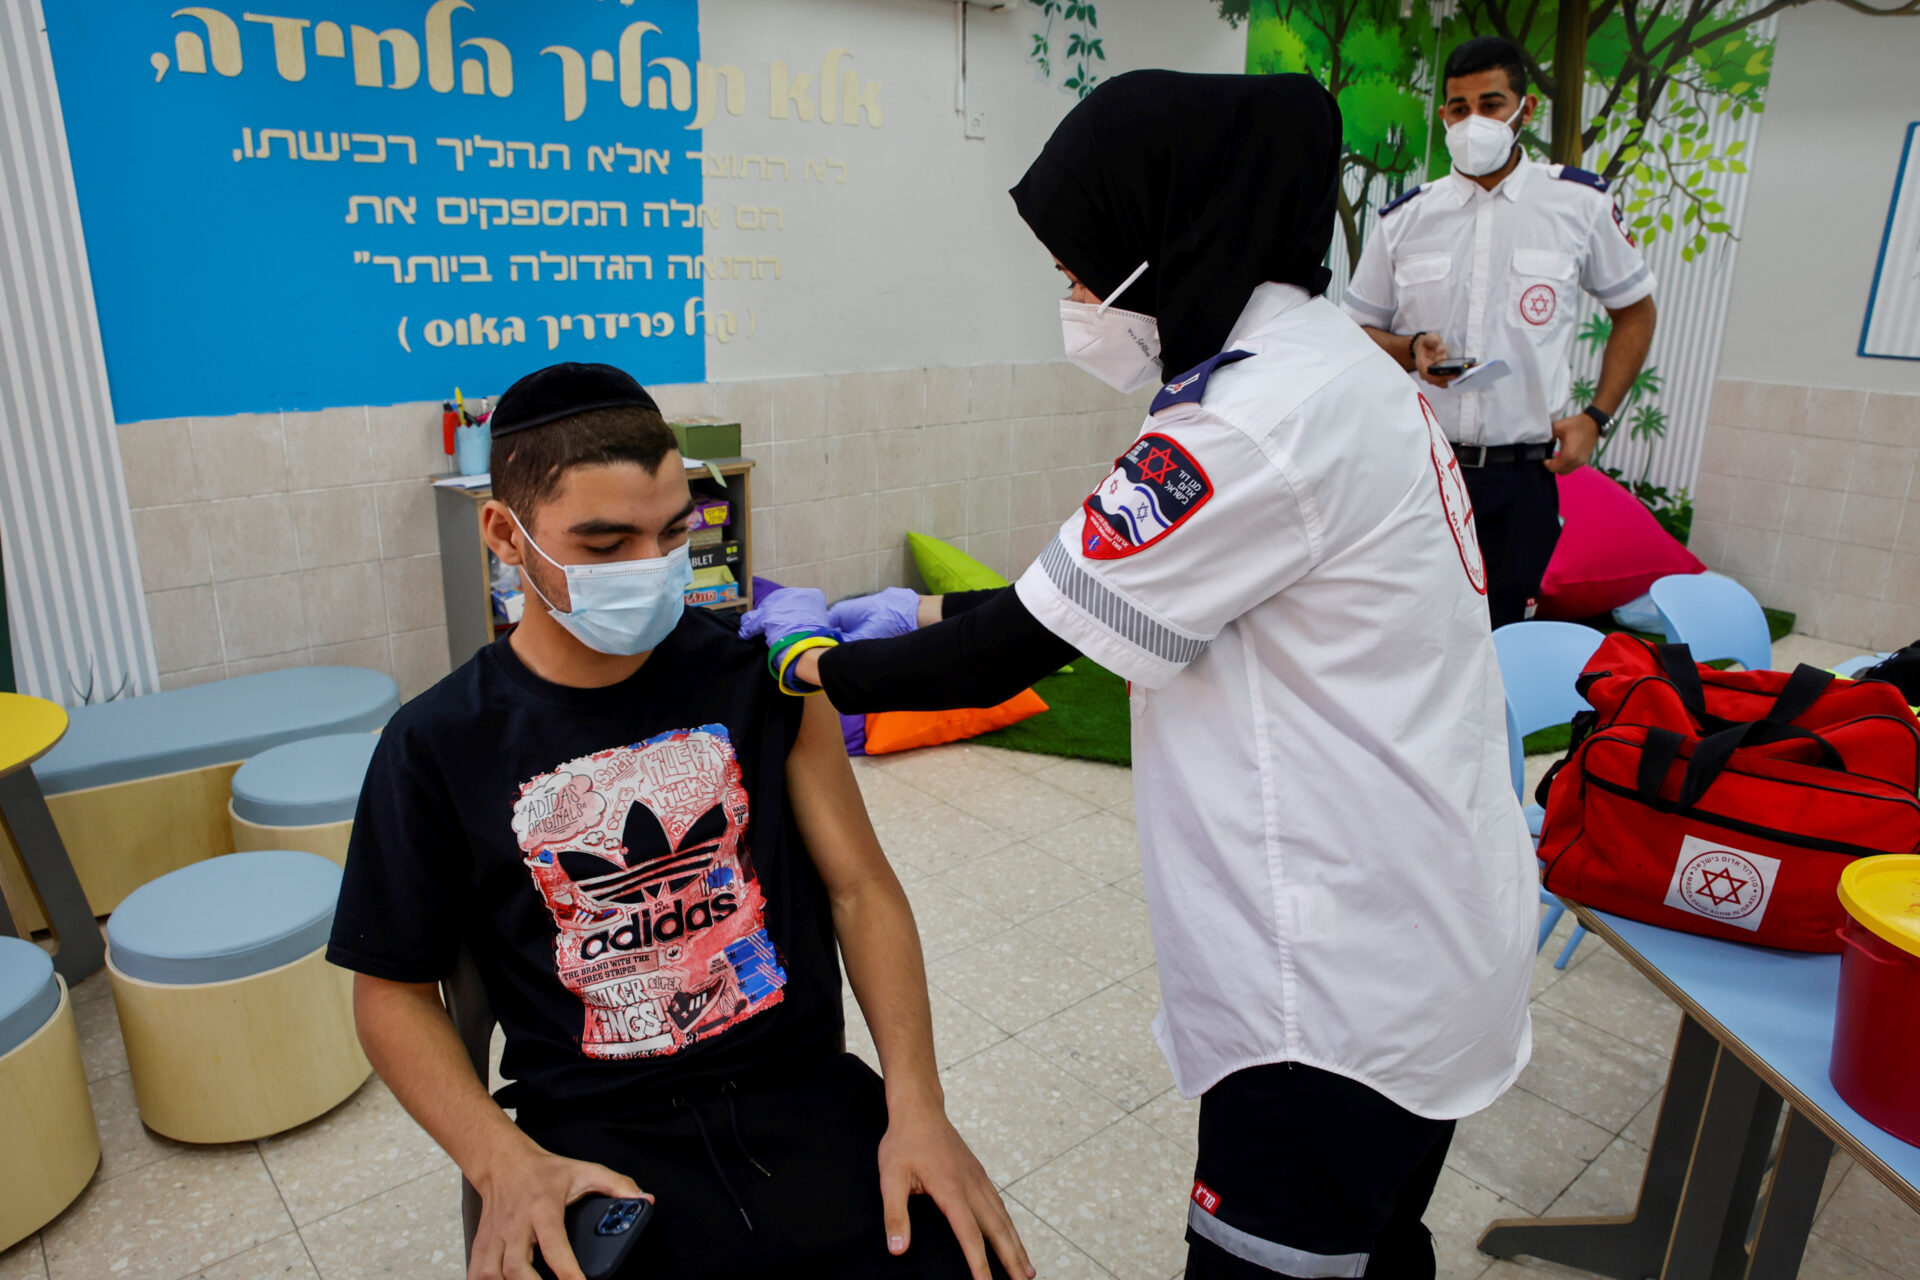 Israeli students at a school in Beersheva receive the Covid-19 vaccine injection. Photo by Flash90